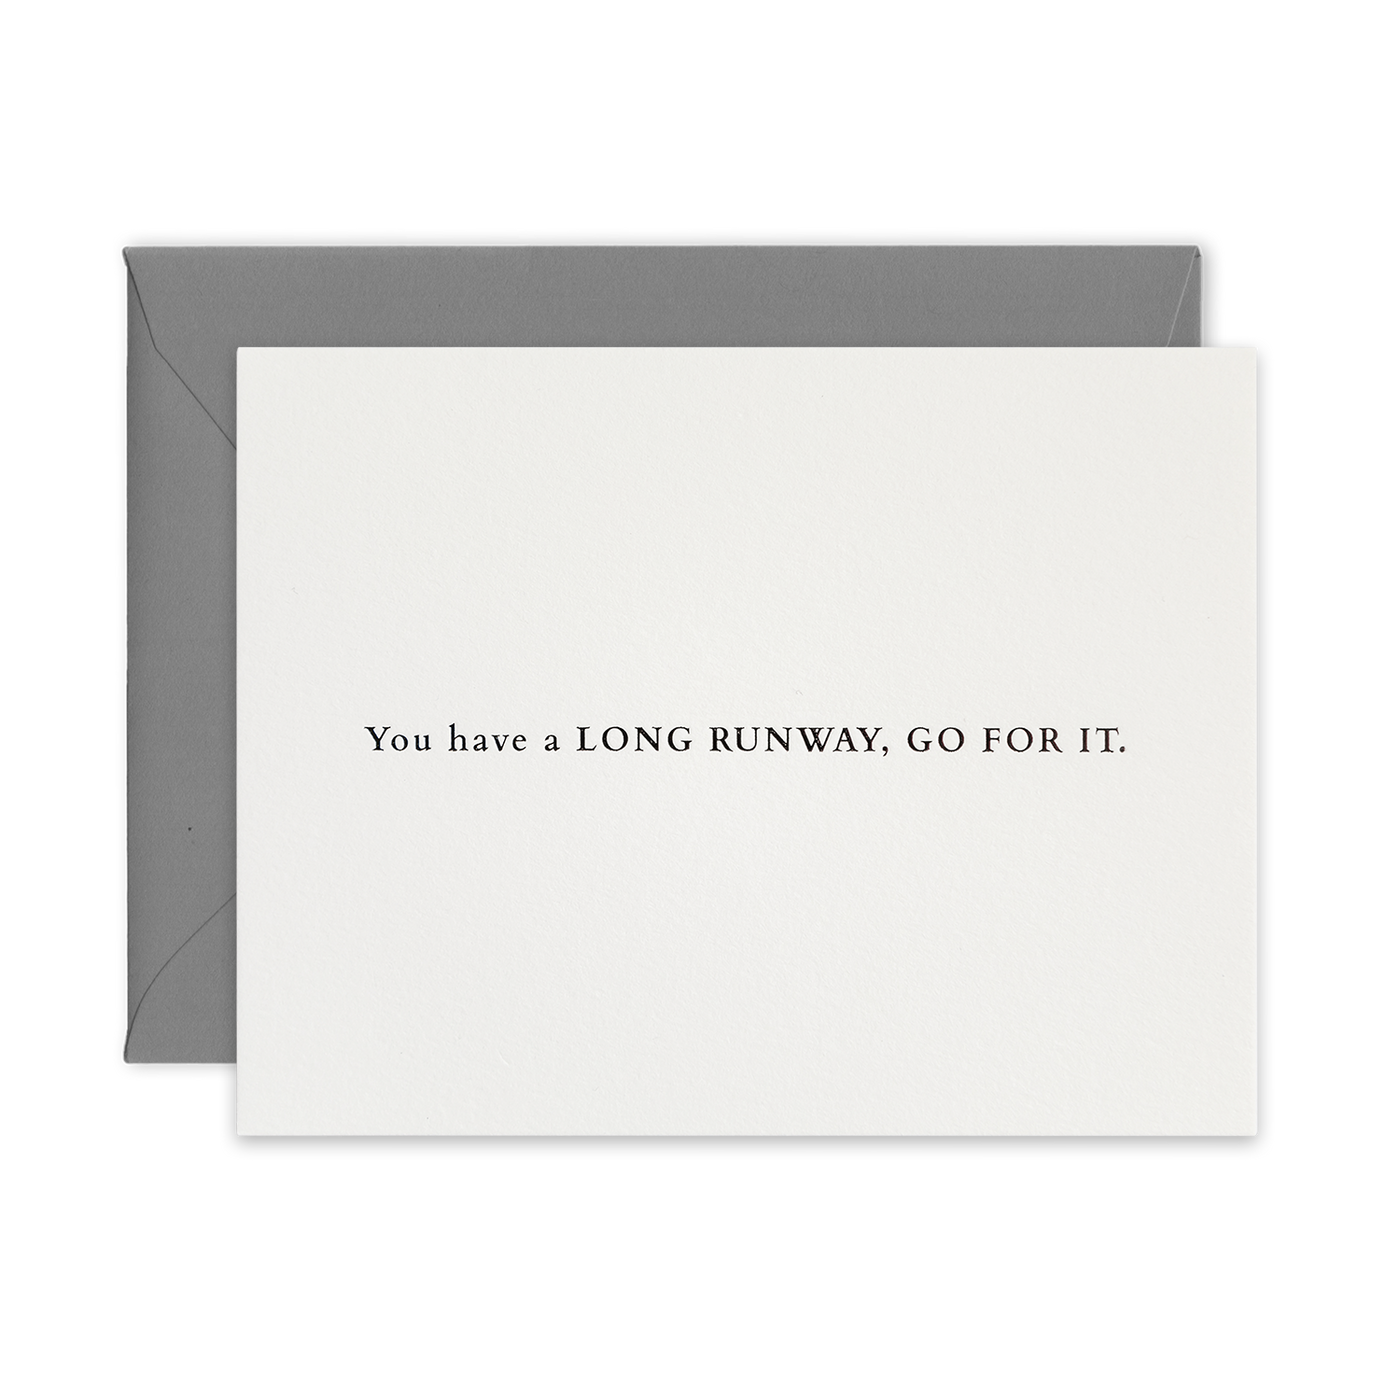 Black foil letterpress greeting card by beknown. You have a long runway, go for it.